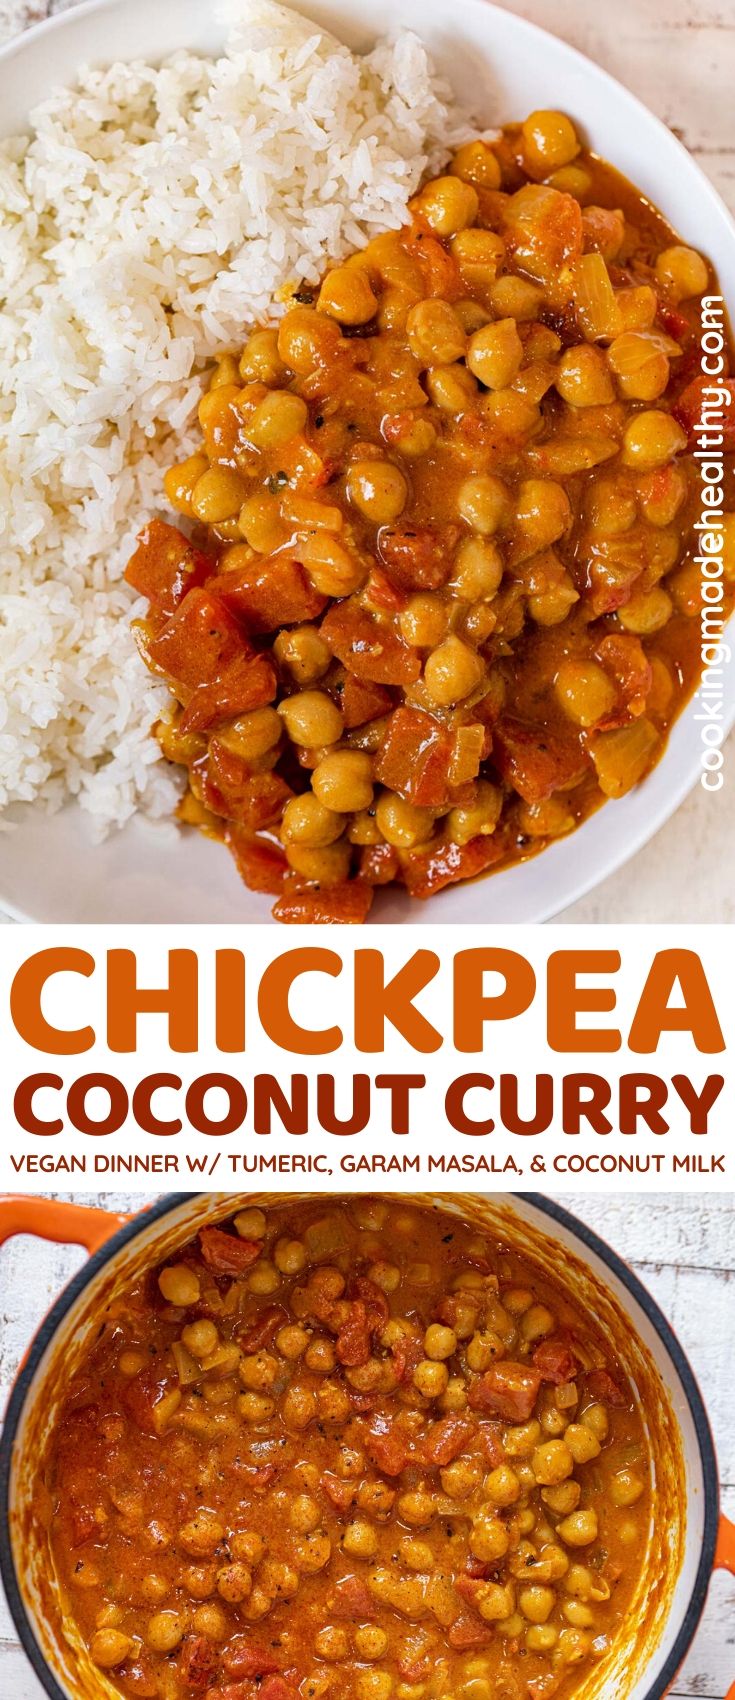 Chickpea Coconut Curry Recipe- Cooking Made Healthy